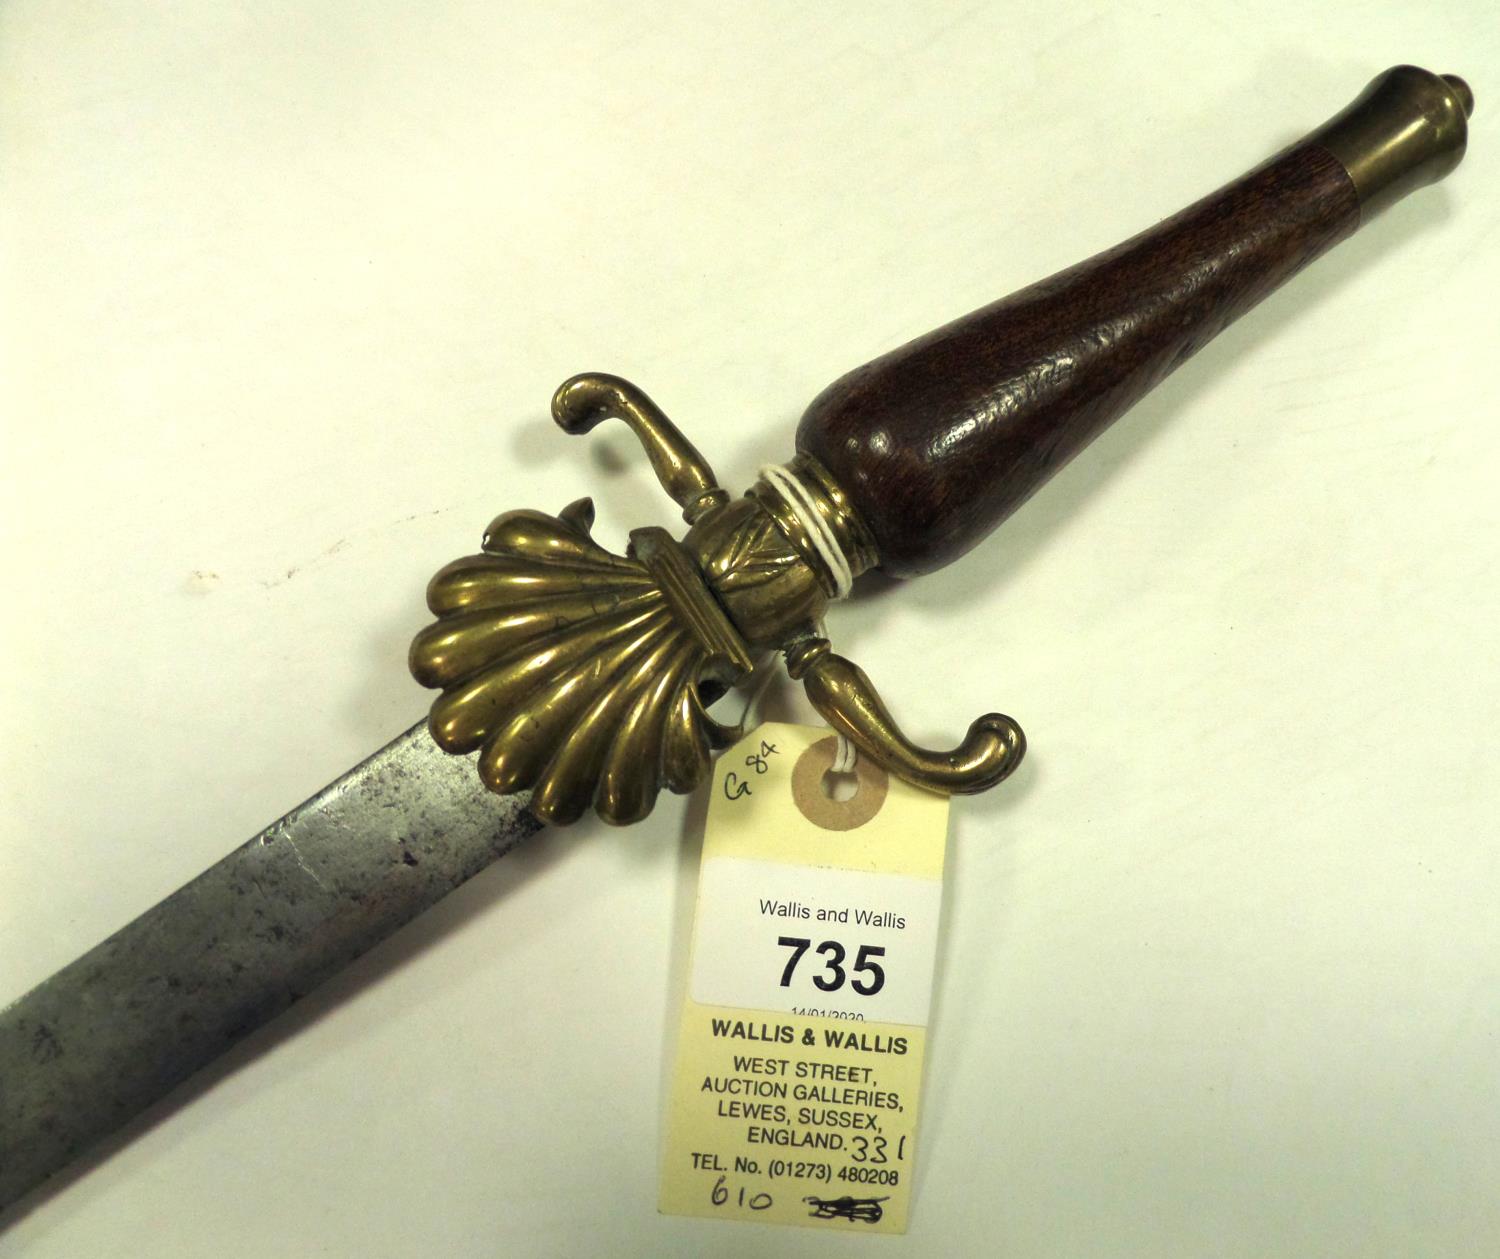 A plug bayonet, blade 15”, DE for half its length, small brass shell guard, lower mount to flattened